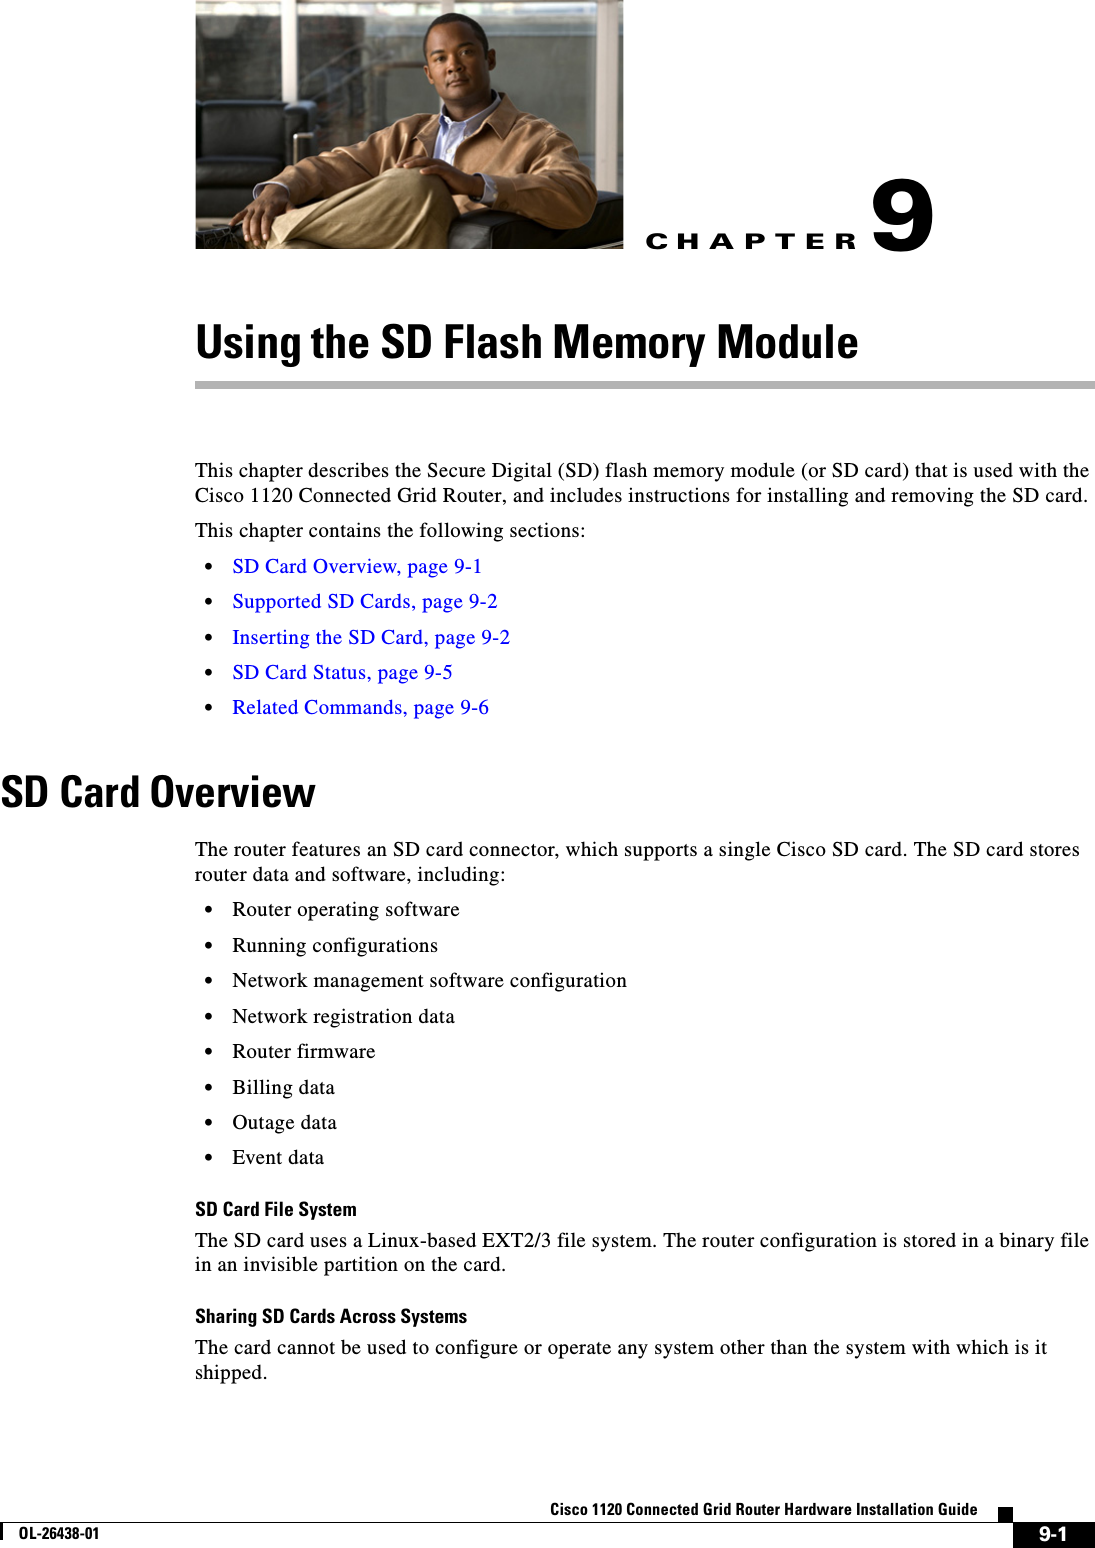 CHAPTER 9-1Cisco 1120 Connected Grid Router Hardware Installation GuideOL-26438-019Using the SD Flash Memory ModuleThis chapter describes the Secure Digital (SD) flash memory module (or SD card) that is used with the Cisco 1120 Connected Grid Router, and includes instructions for installing and removing the SD card. This chapter contains the following sections:•SD Card Overview, page 9-1•Supported SD Cards, page 9-2•Inserting the SD Card, page 9-2•SD Card Status, page 9-5 •Related Commands, page 9-6SD Card OverviewThe router features an SD card connector, which supports a single Cisco SD card. The SD card stores router data and software, including:•Router operating software•Running configurations•Network management software configuration•Network registration data•Router firmware•Billing data•Outage data•Event dataSD Card File SystemThe SD card uses a Linux-based EXT2/3 file system. The router configuration is stored in a binary file in an invisible partition on the card.Sharing SD Cards Across SystemsThe card cannot be used to configure or operate any system other than the system with which is it shipped.